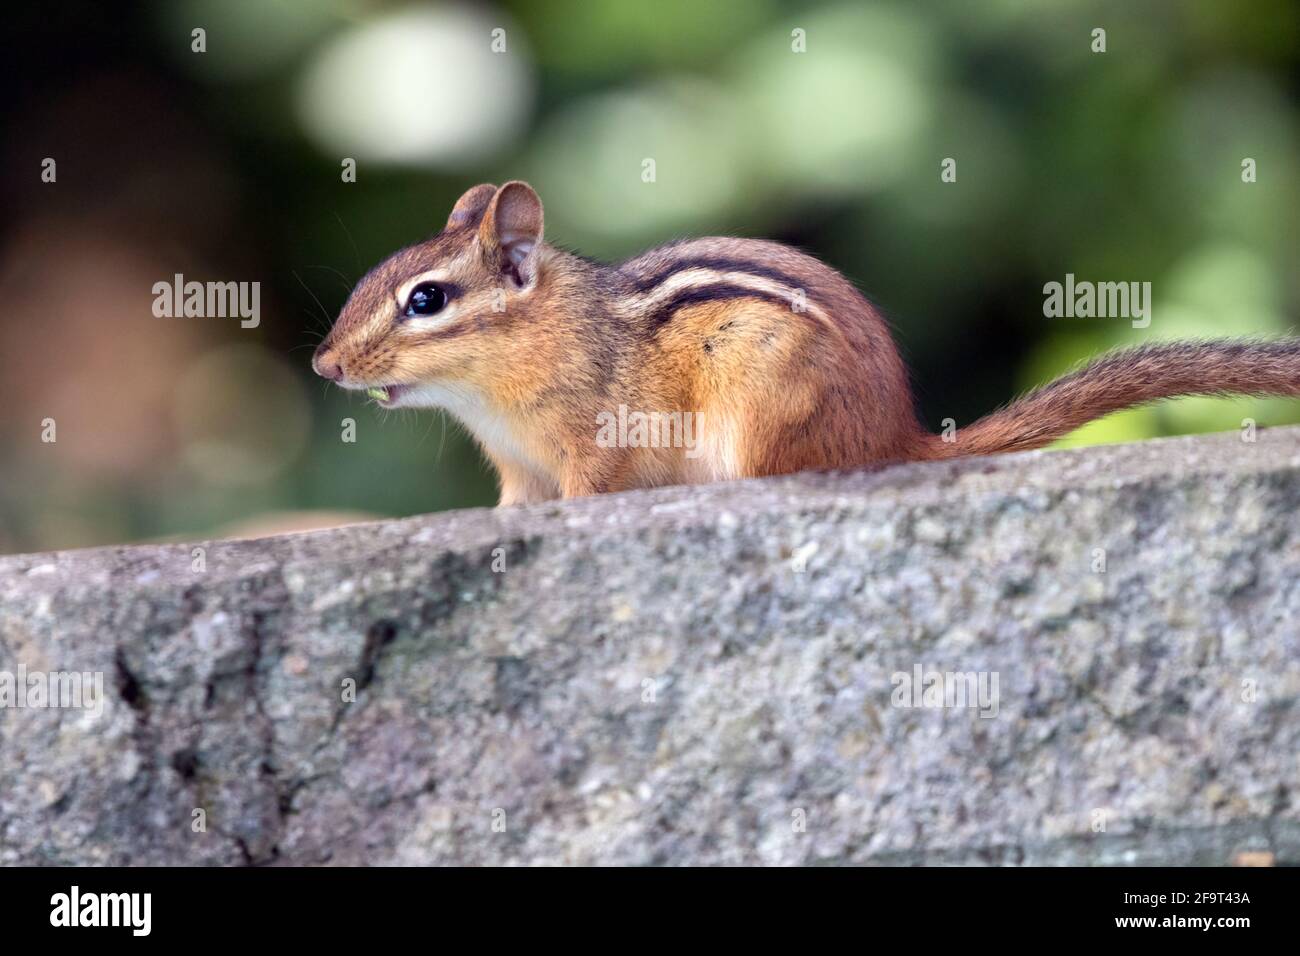 A chipmunk in front of a garden in Southwestern Ontario, Canada. Stock Photo